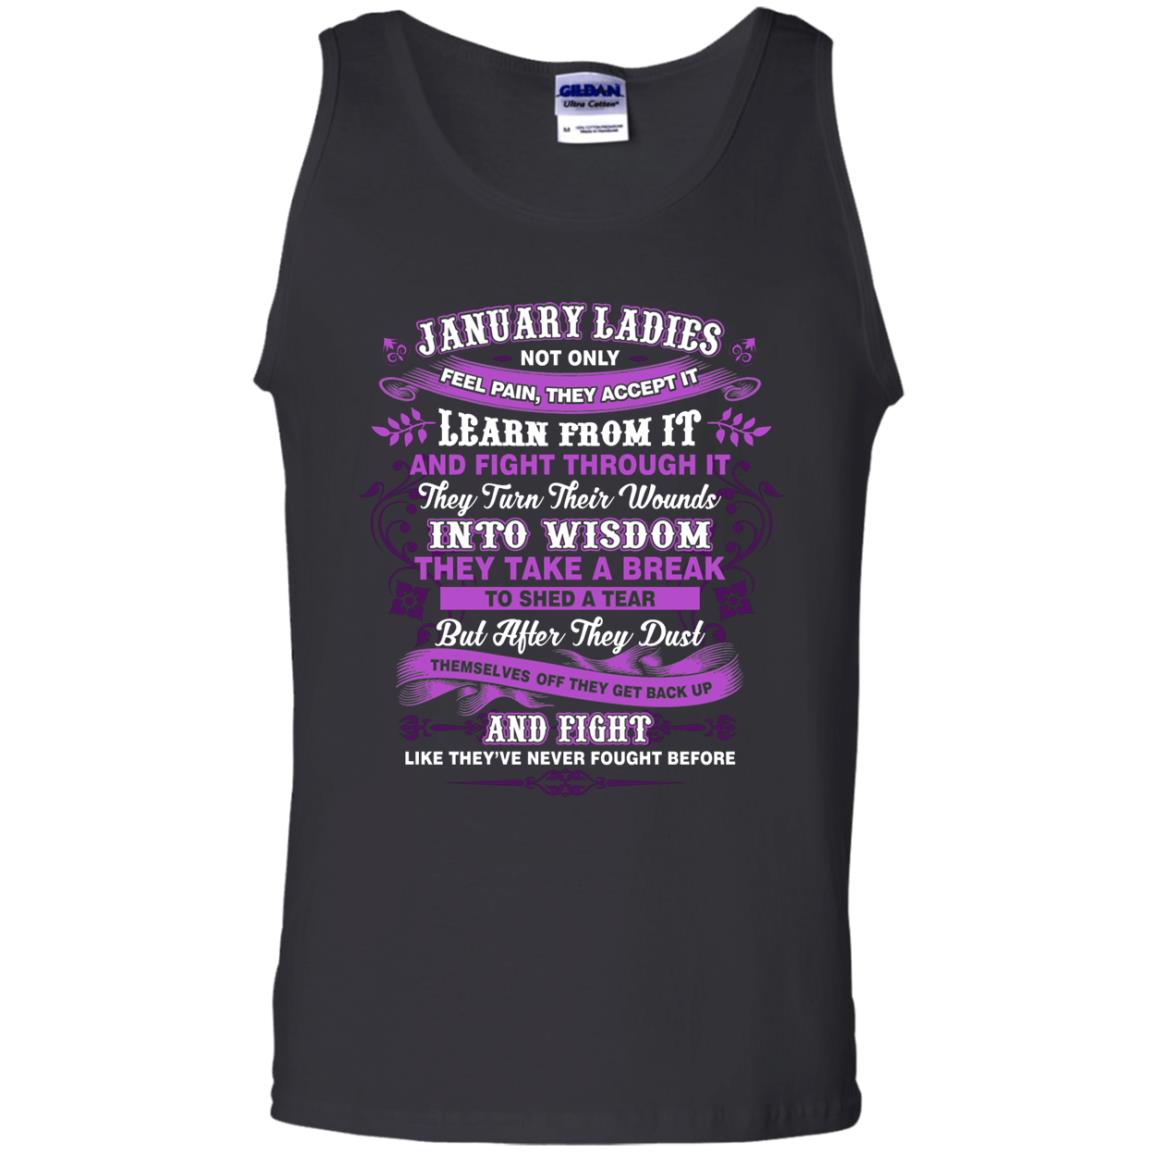 January Ladies Shirt Not Only Feel Pain They Accept It Learn From It They Turn Their Wounds Into WisdomG220 Gildan 100% Cotton Tank Top